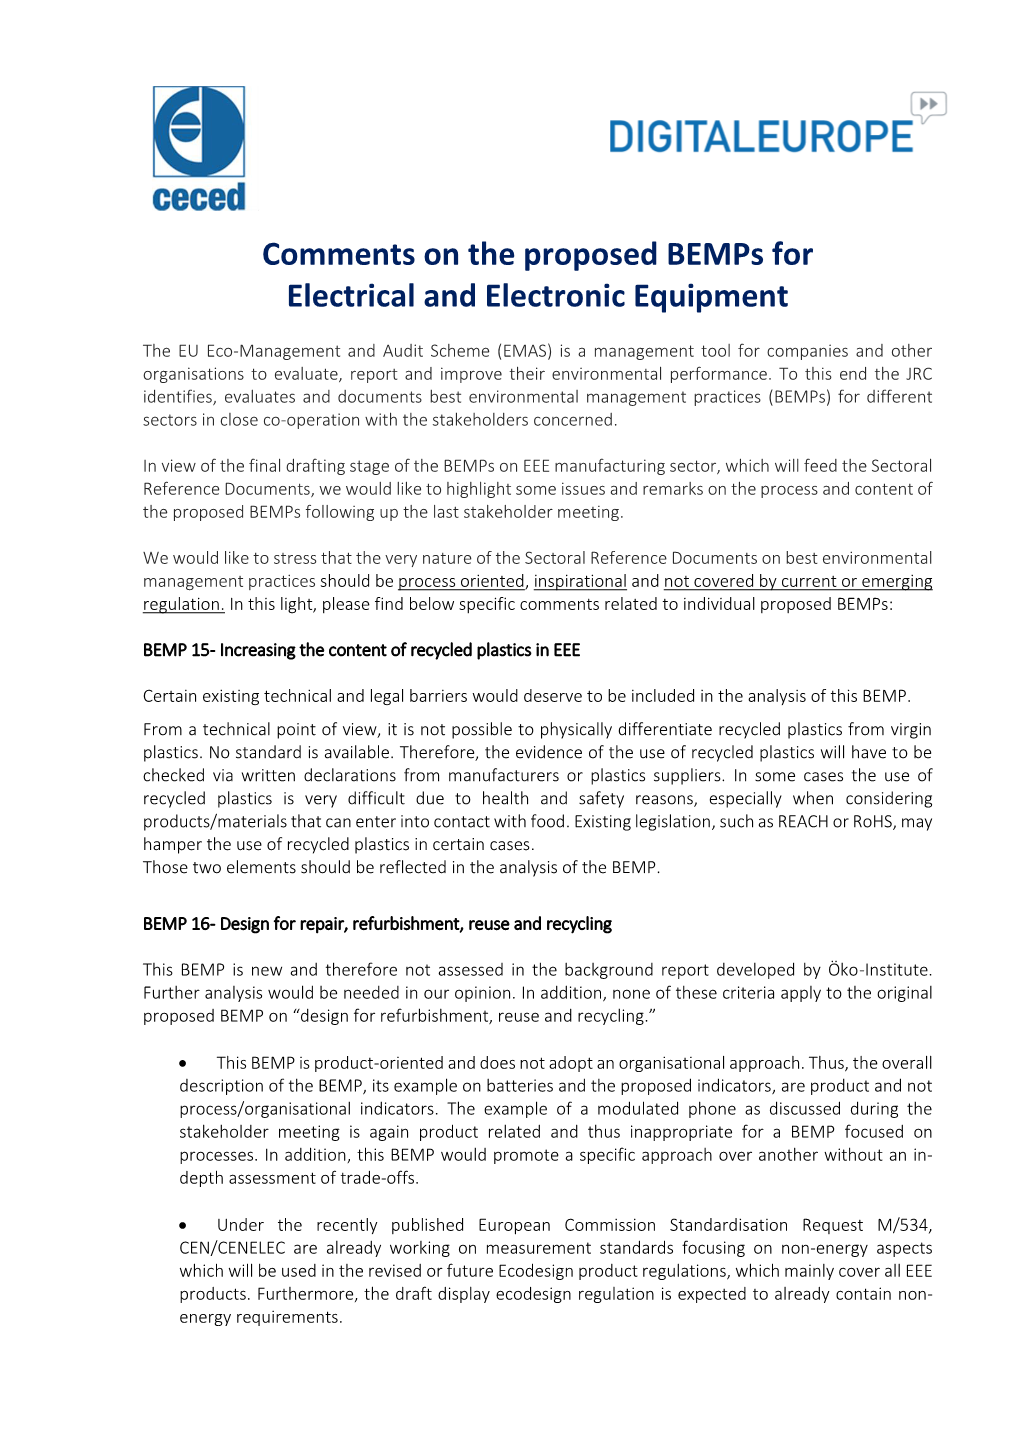 Comments on the Proposed Bemps for Electrical and Electronic Equipment